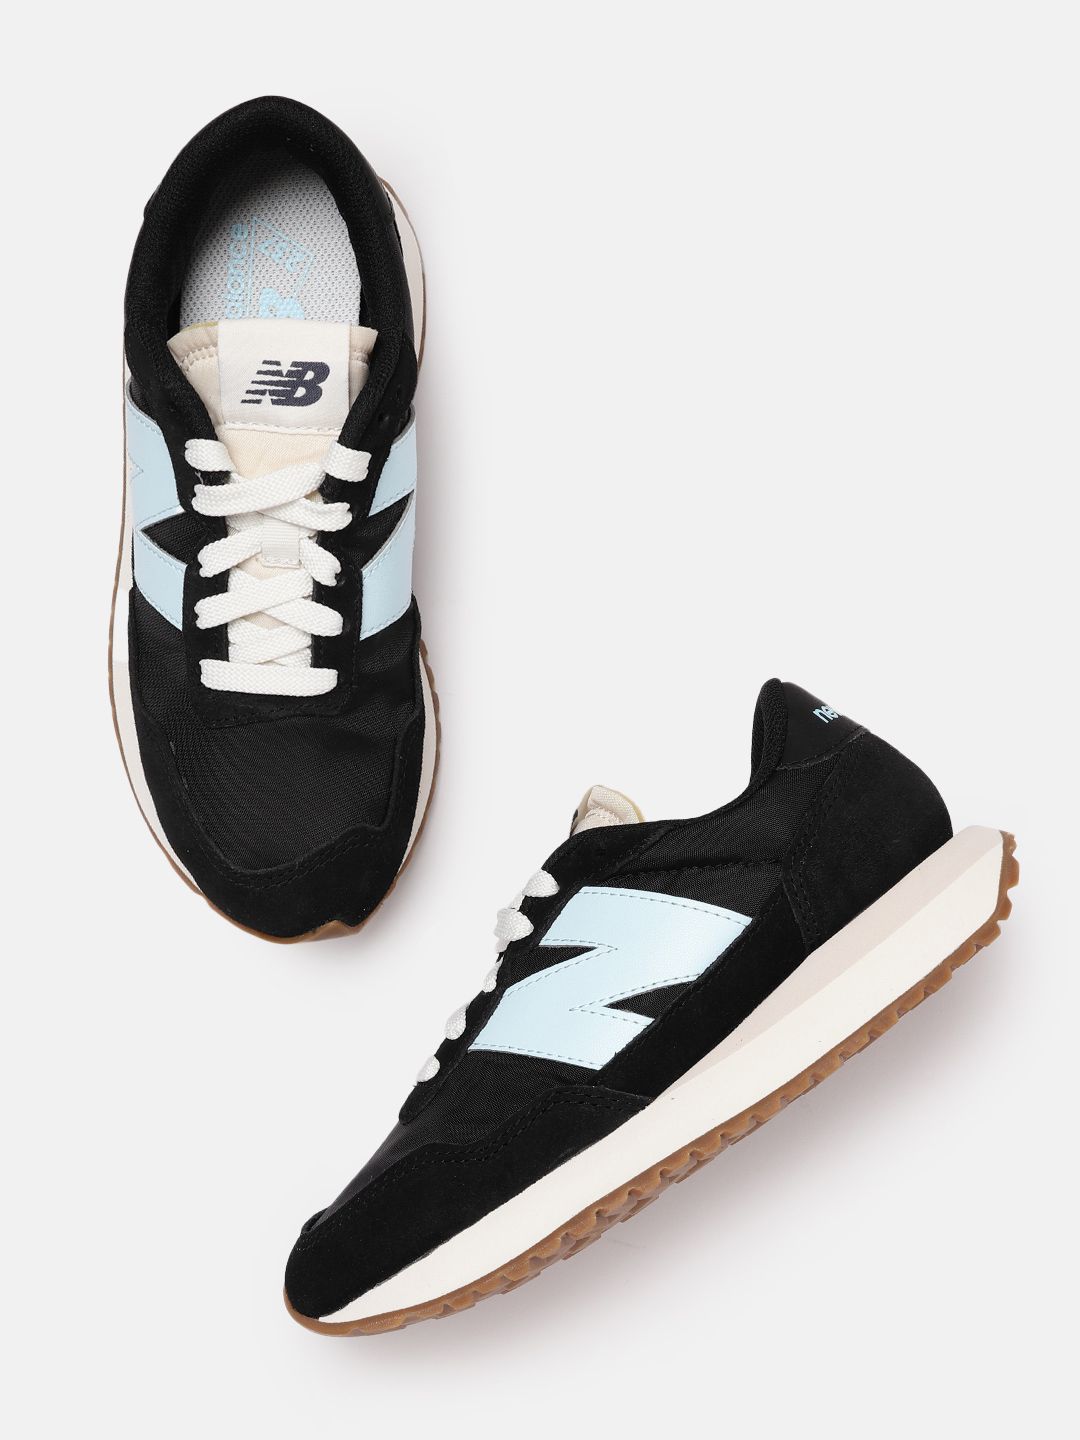 New Balance Women Black & Blue Colourblocked Suede Sneakers Price in India